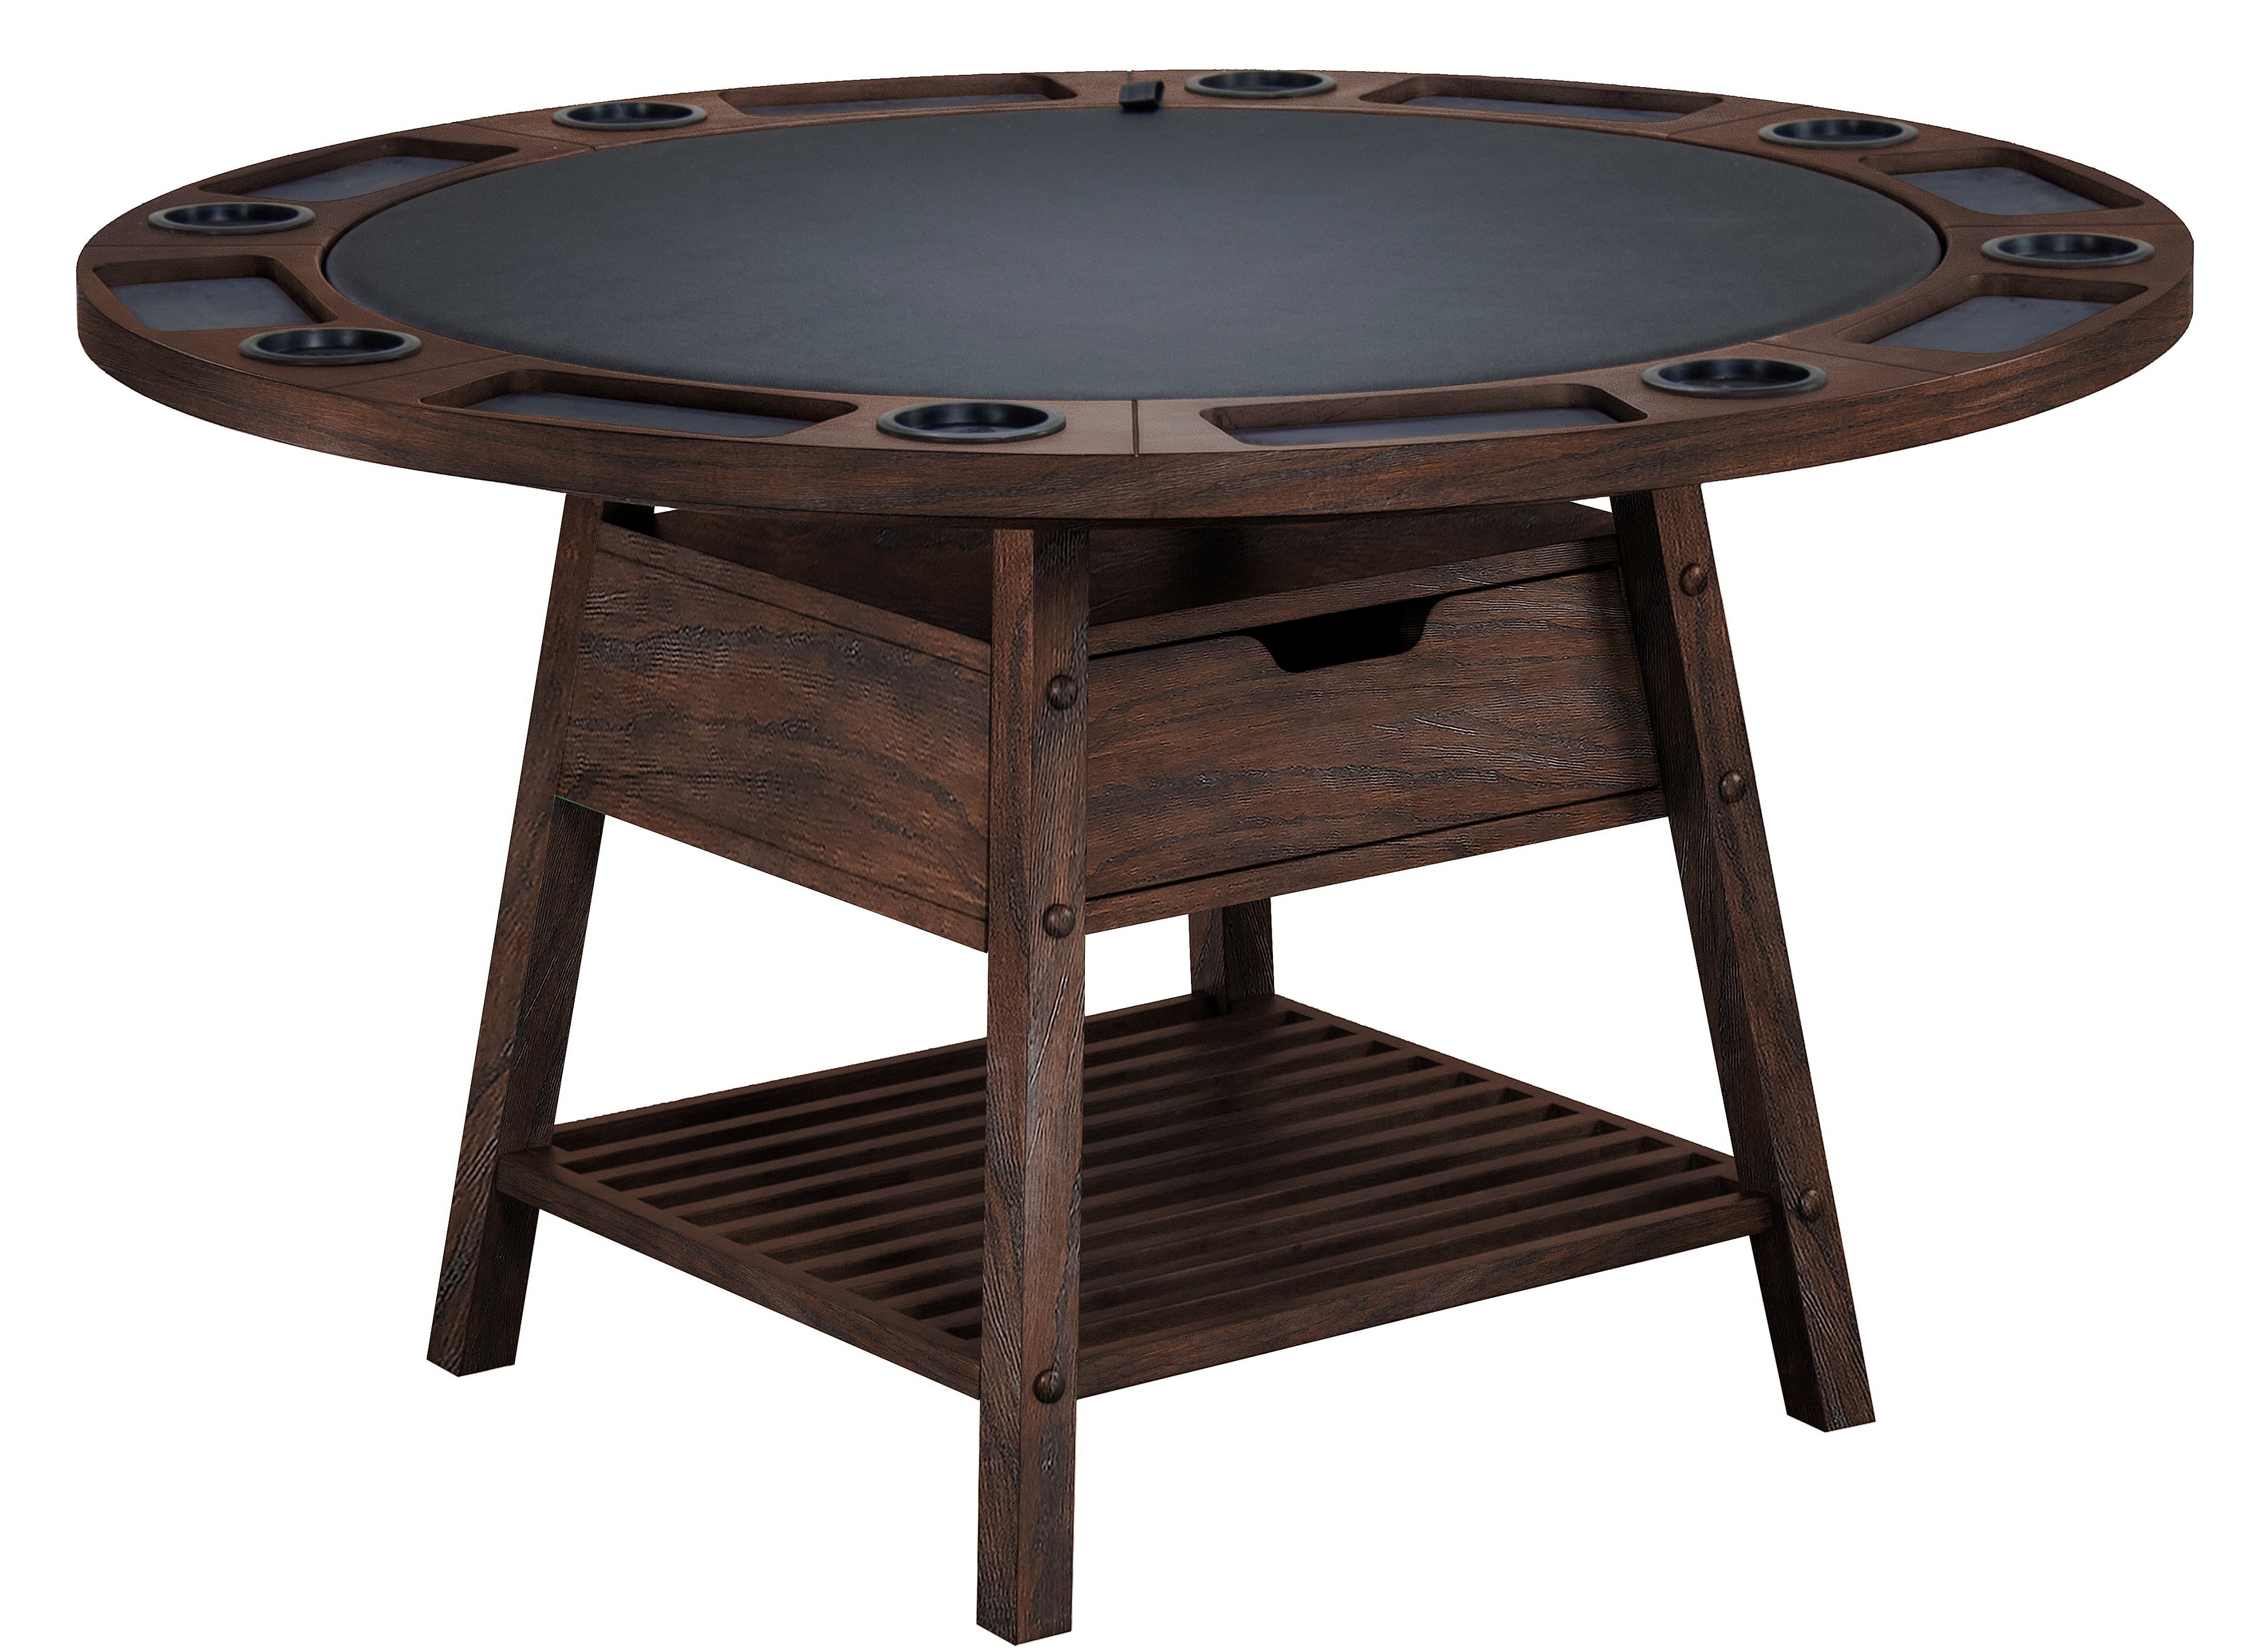 Legacy Billiards Emory Game Table in Whiskey Barrel Finish